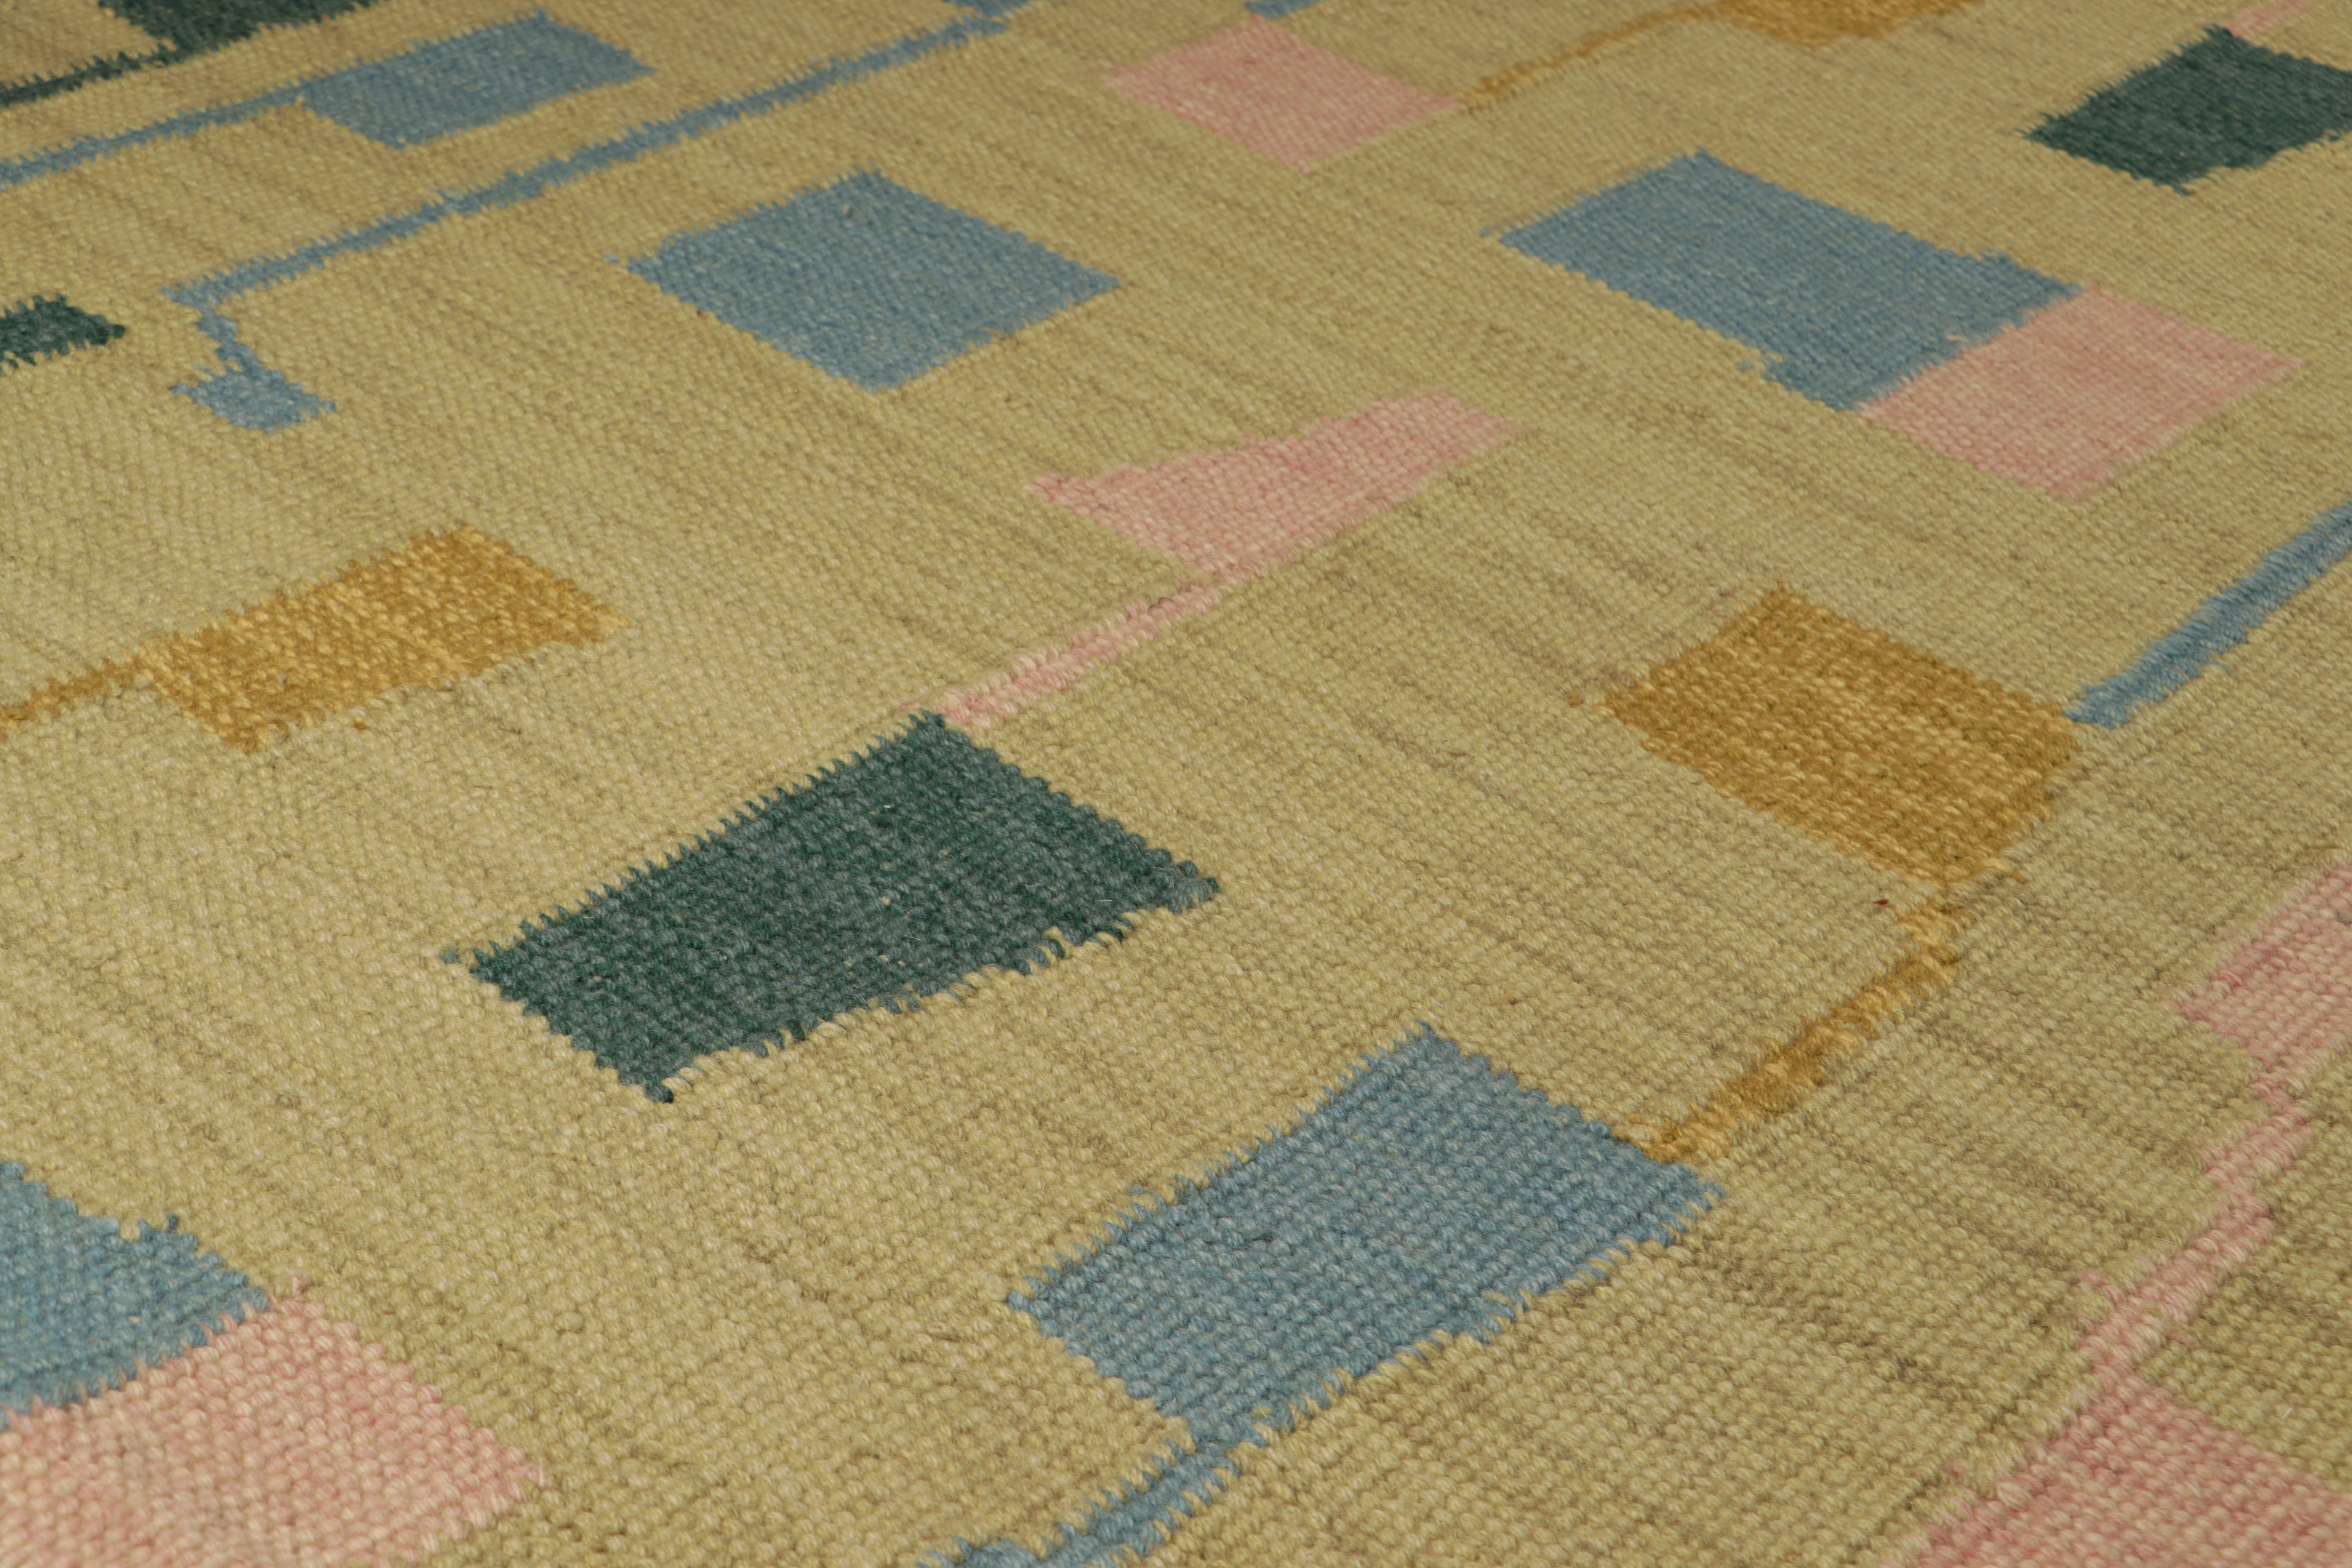 From an exciting new collection of gift-size pieces, this 4x5 Swedish-style accent rug is a bold new addition to the Scandinavian Collection by Rug & Kilim. Handwoven in a wool flatweave with undyed natural yarns as well, its design is inspired by